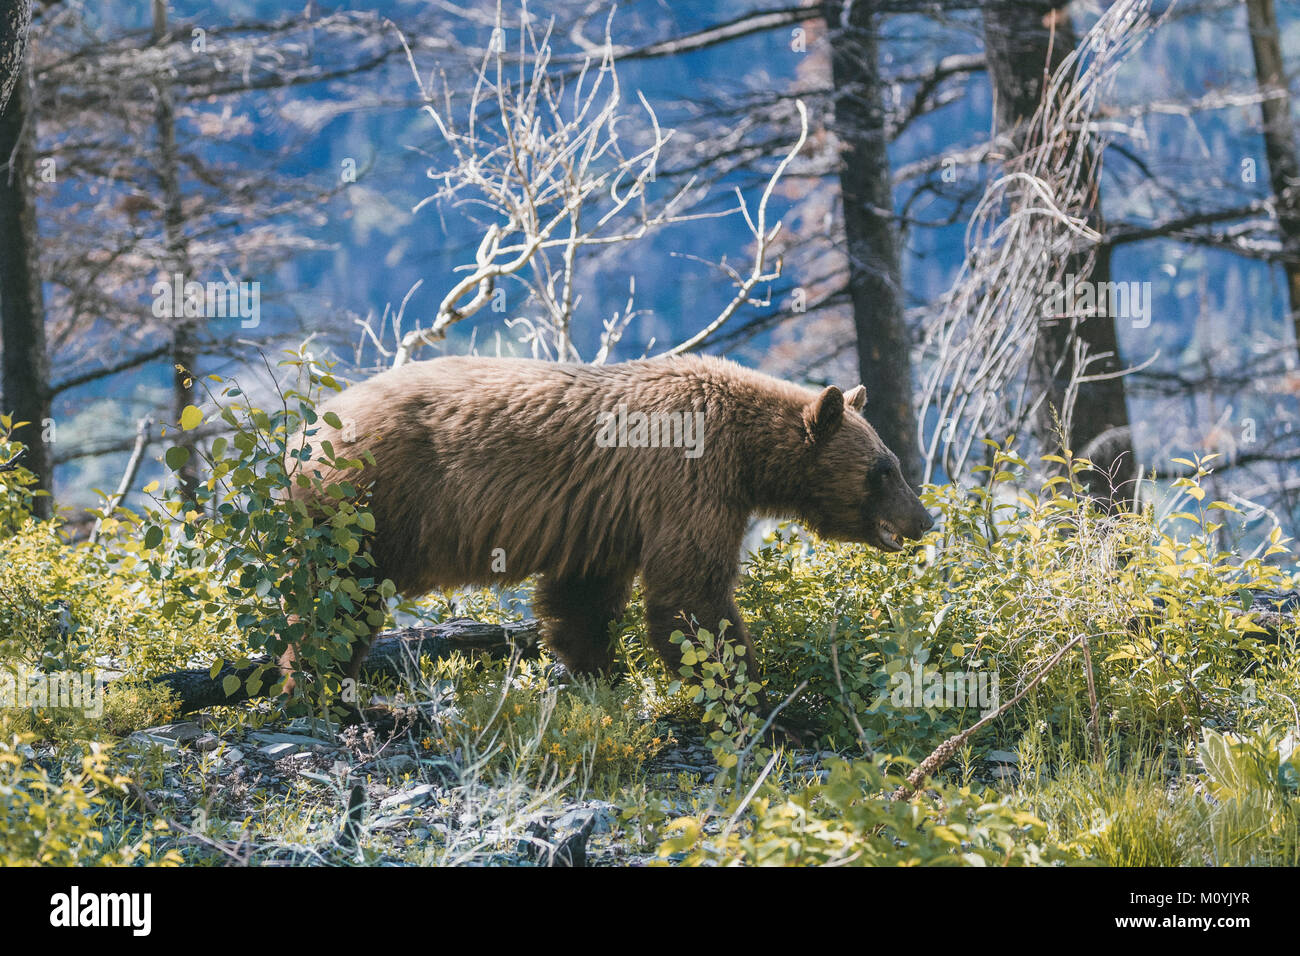 Bear in forest Stock Photo